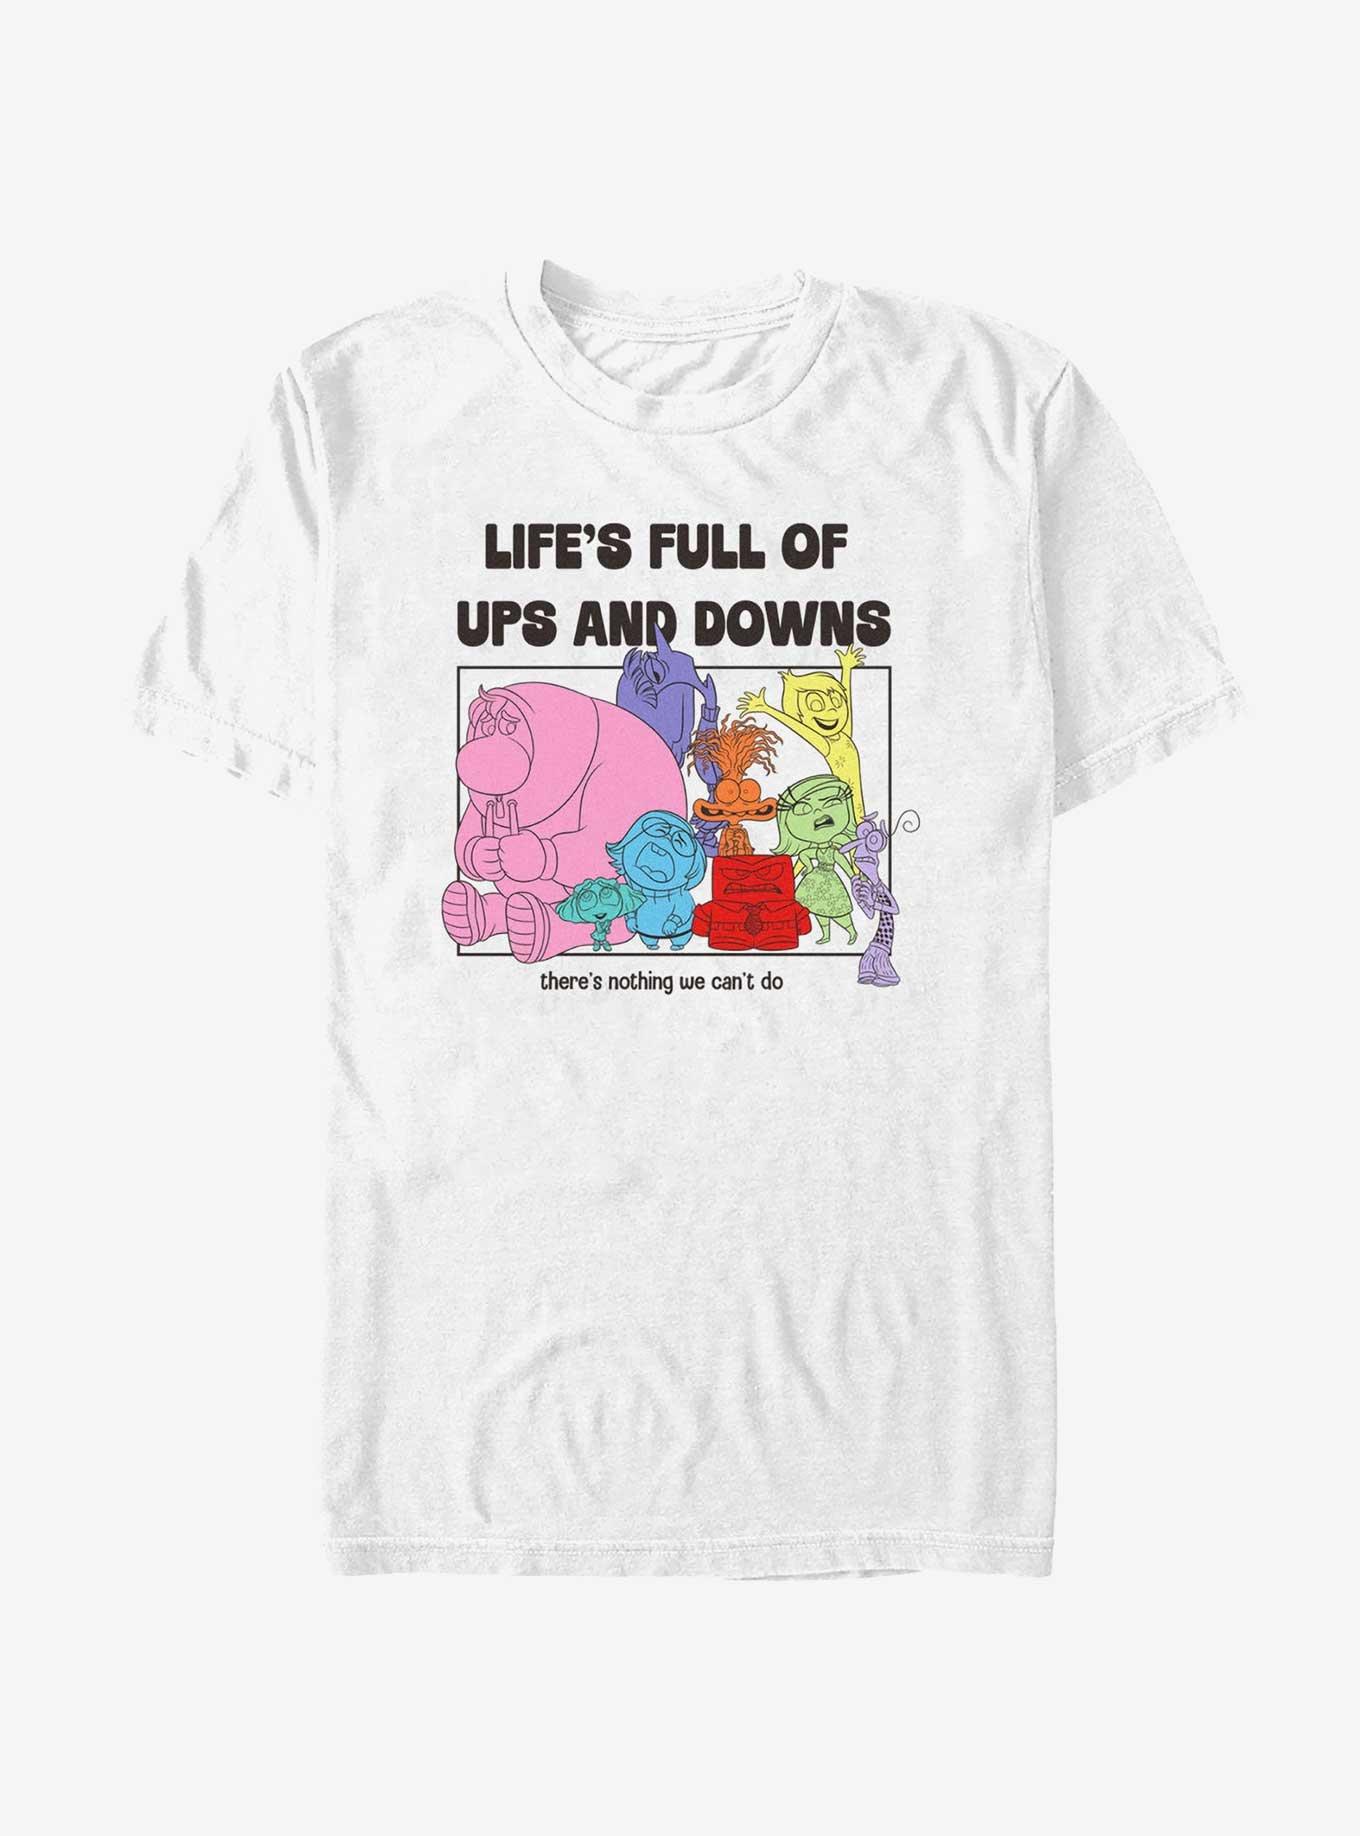 Disney Pixar Inside Out 2 Life's Full Of Ups And Downs T-Shirt, WHITE, hi-res